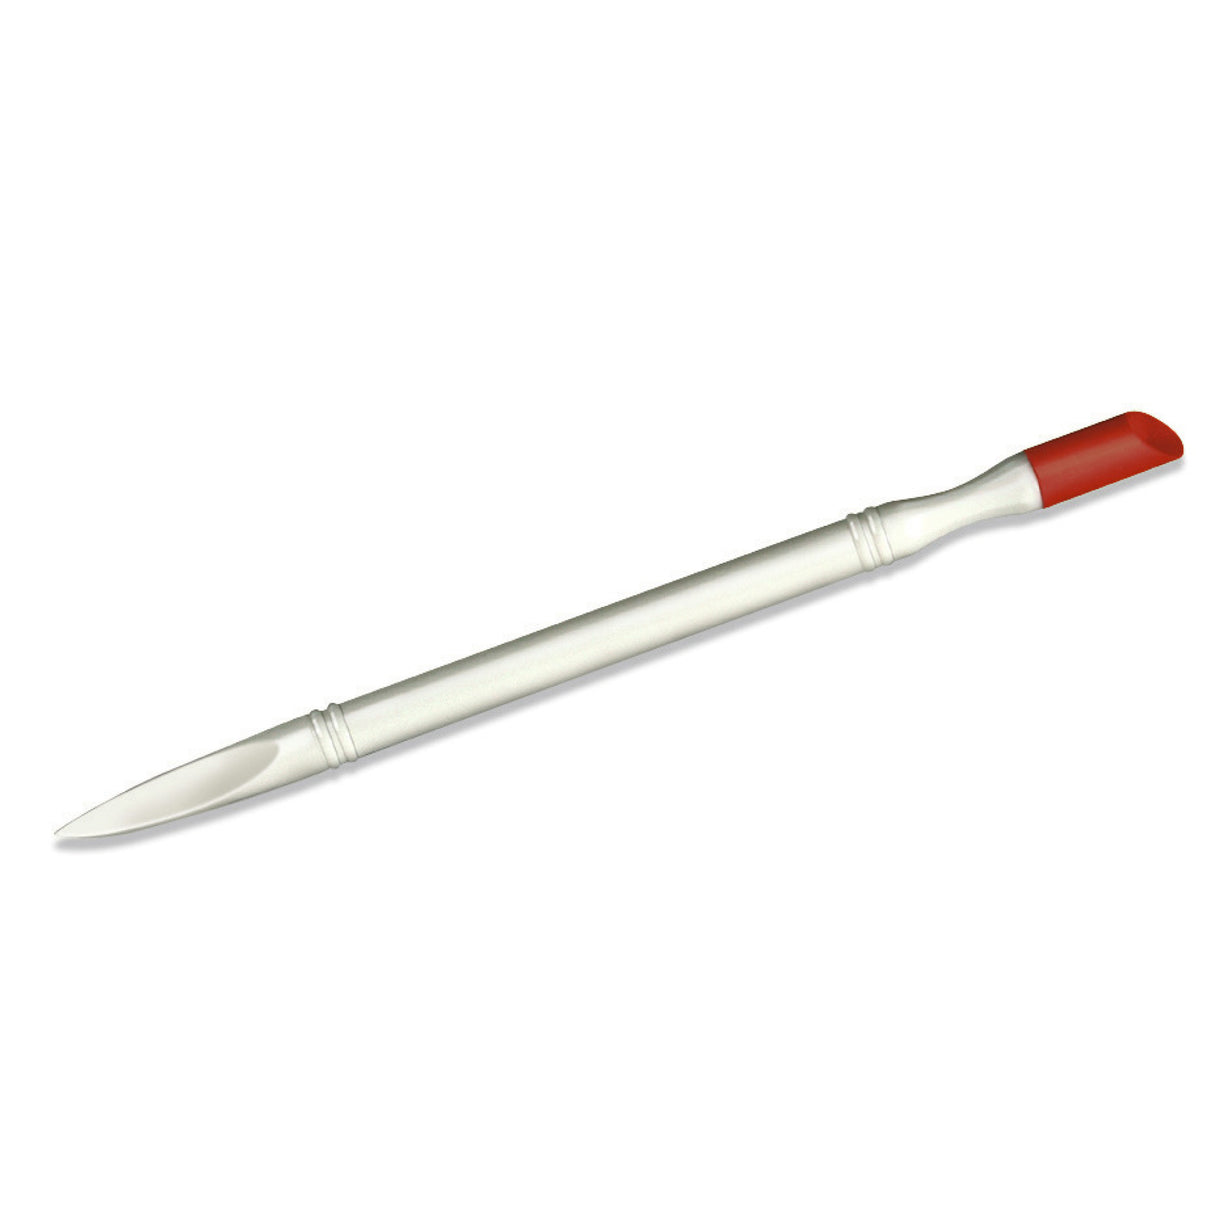 Cuticle pusher with rubber tip 11.5cm